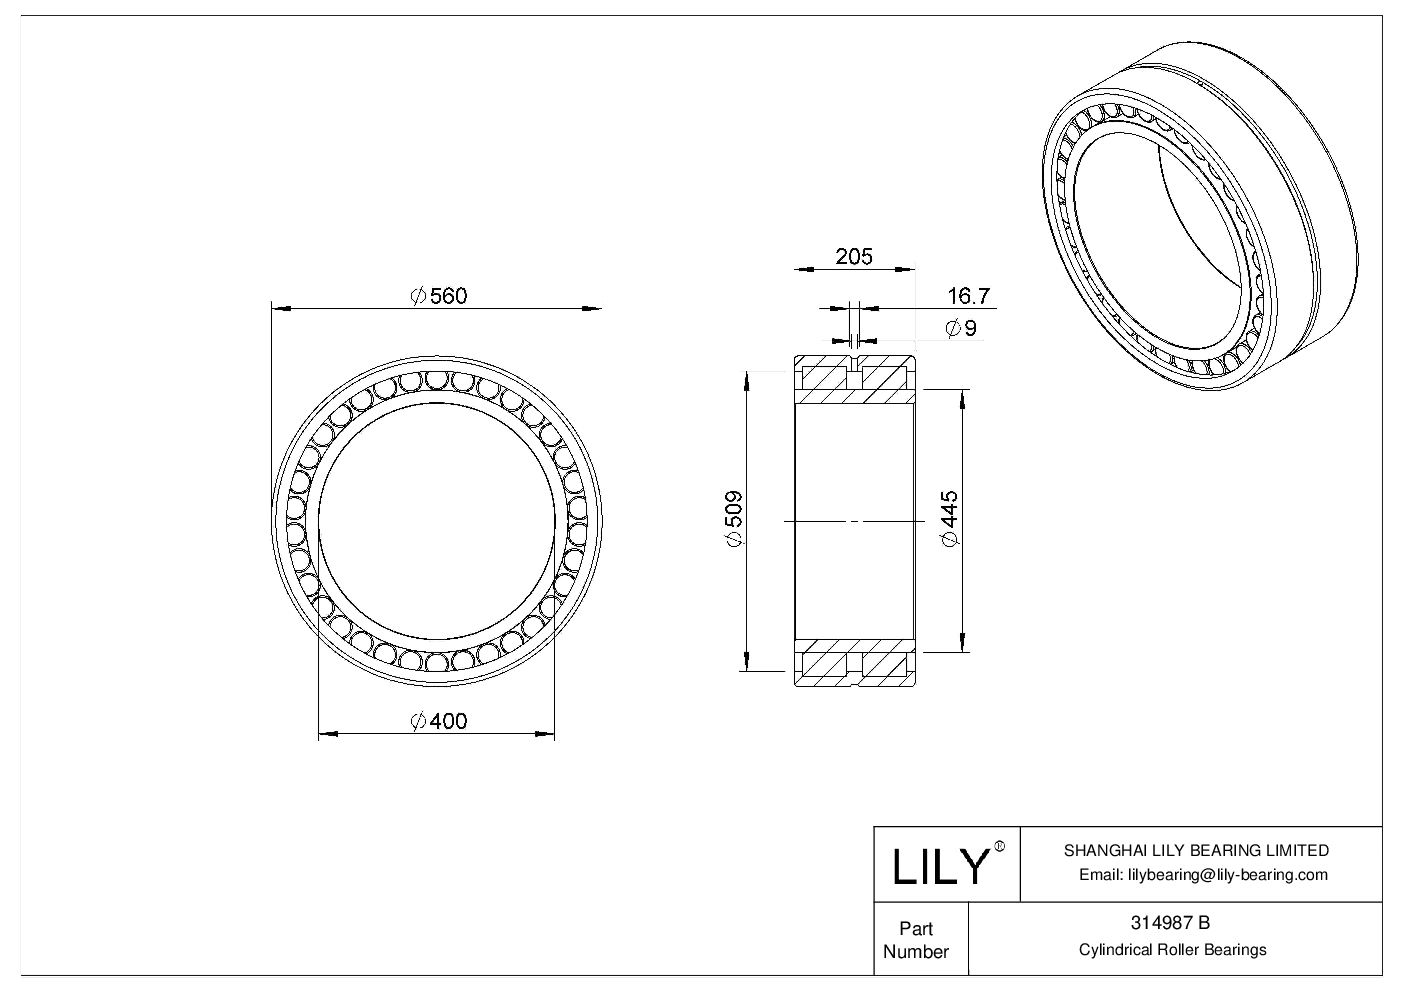 314987 B Double Row Cylindrical Roller Bearings cad drawing